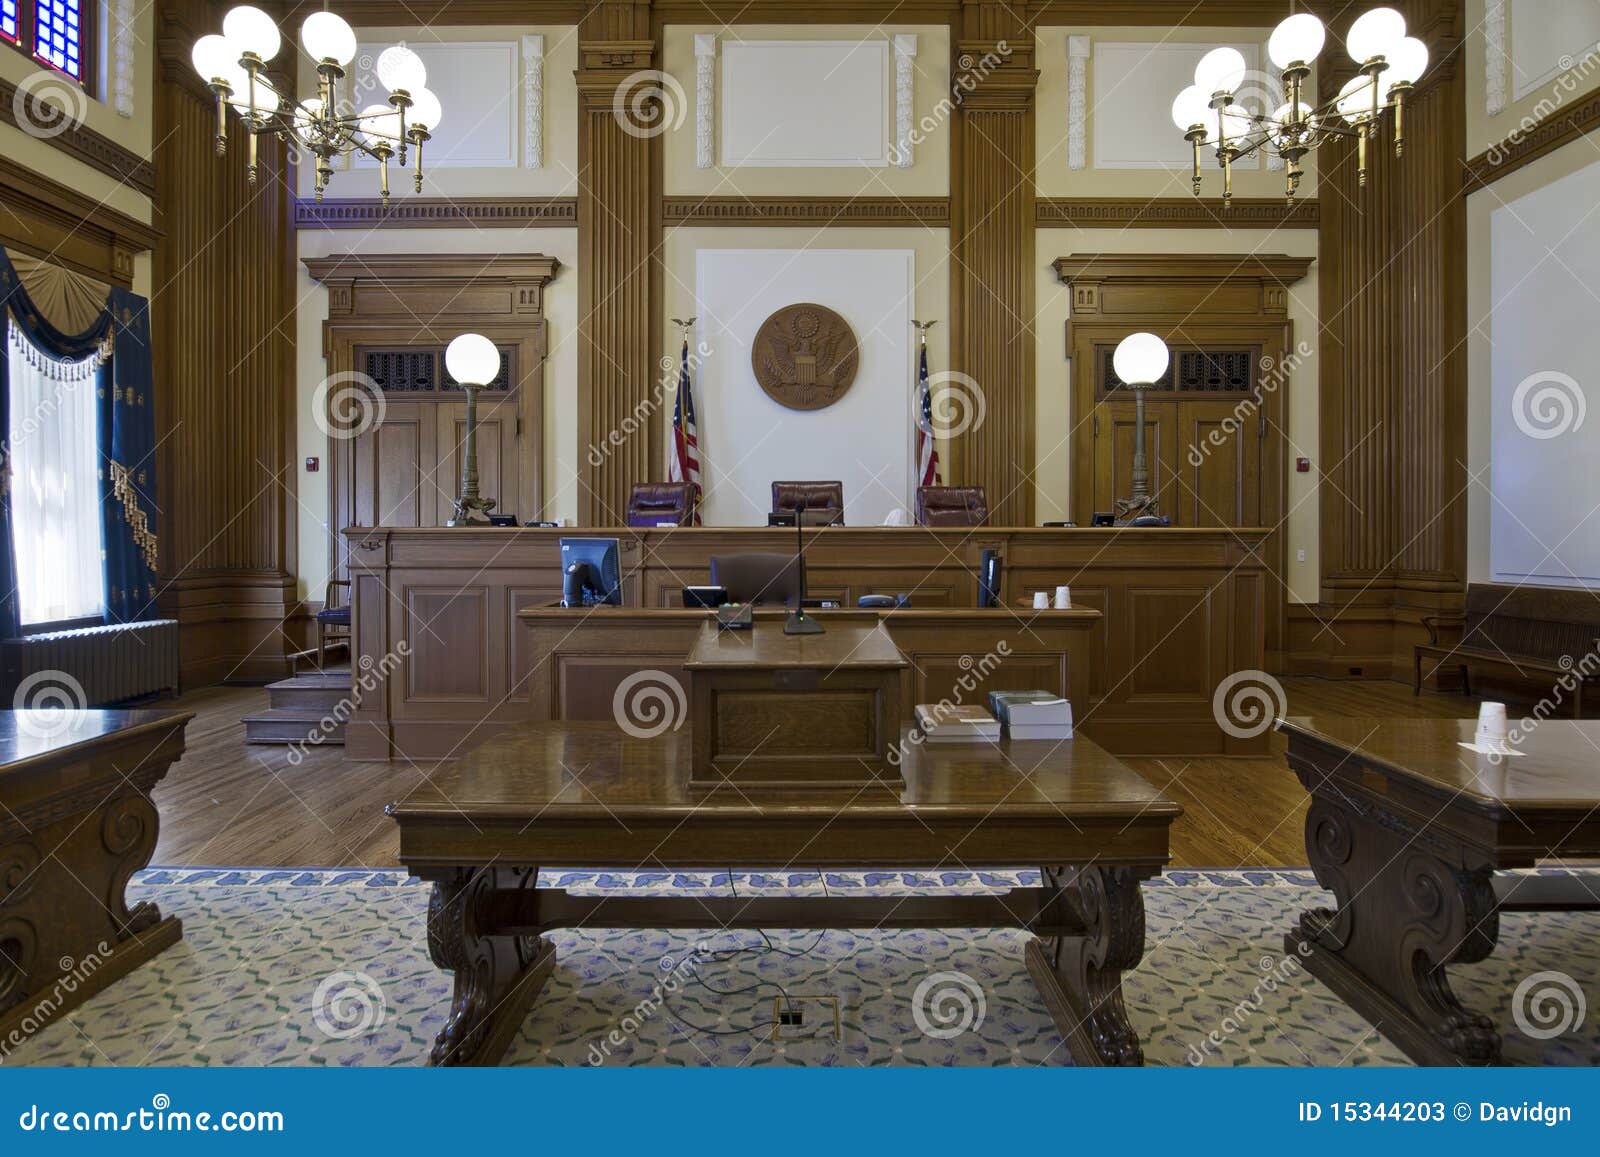 court of appeals courtroom 3